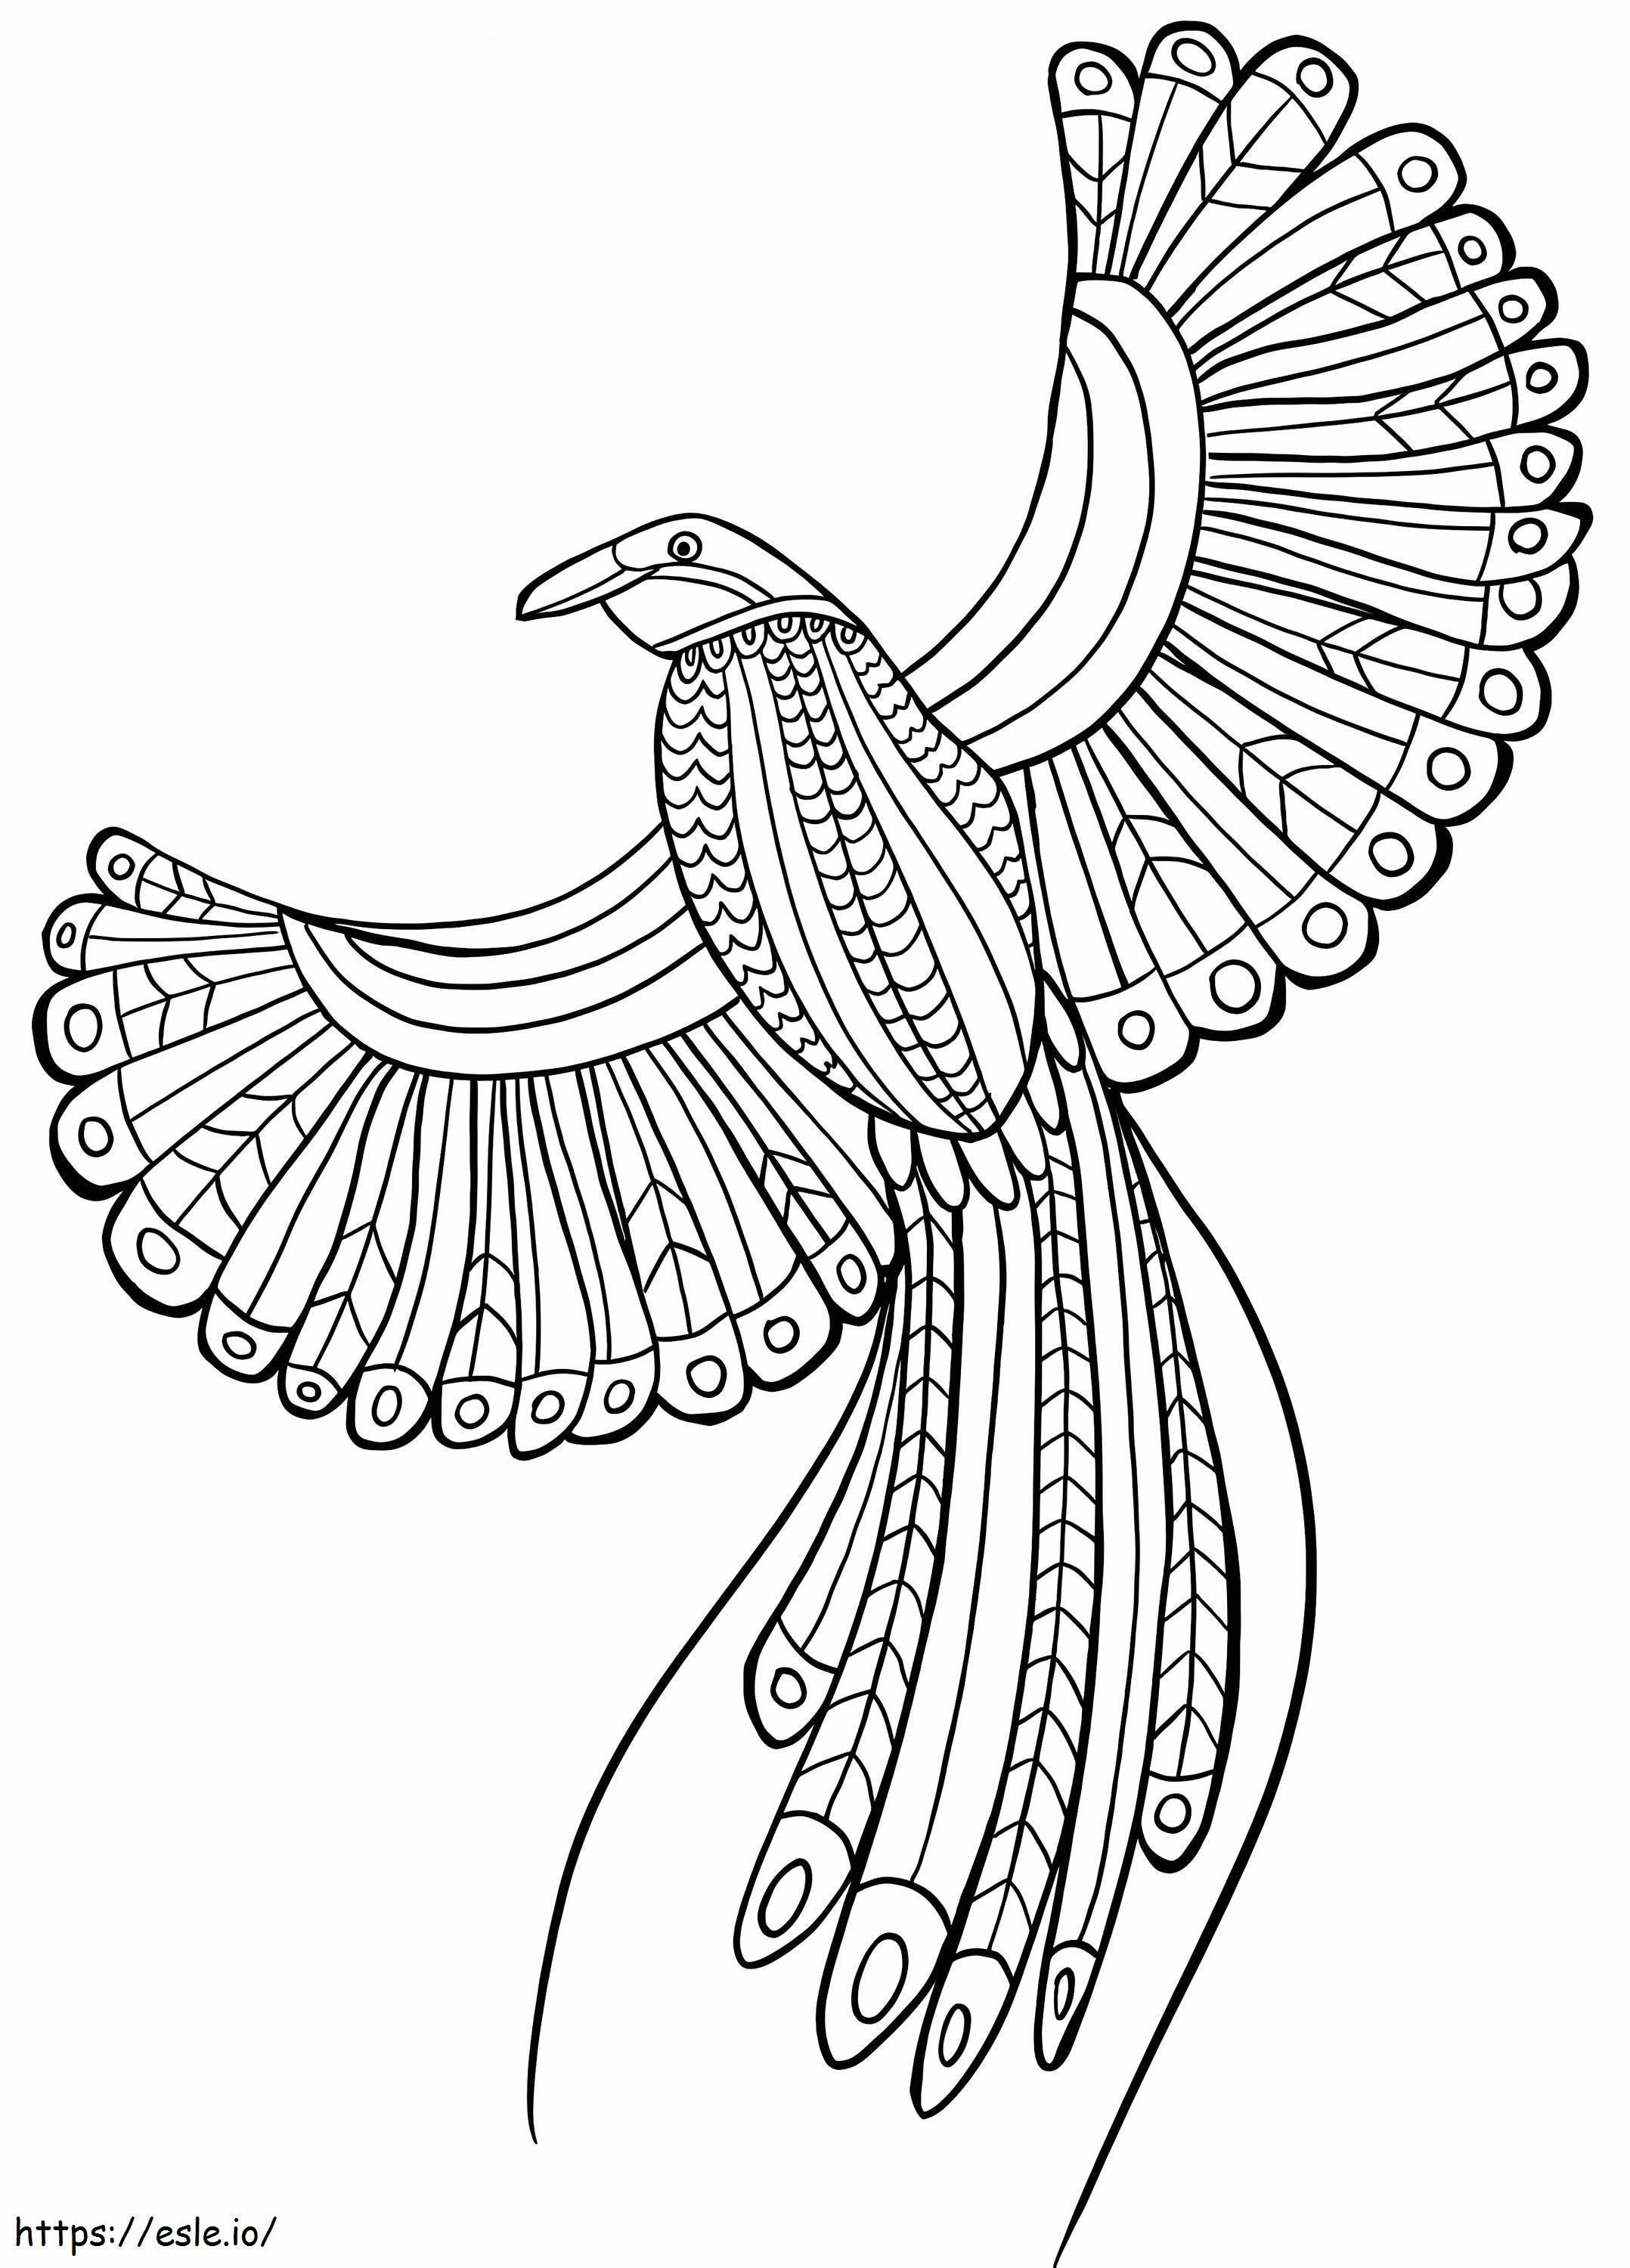 Bird Of Paradise 5 coloring page